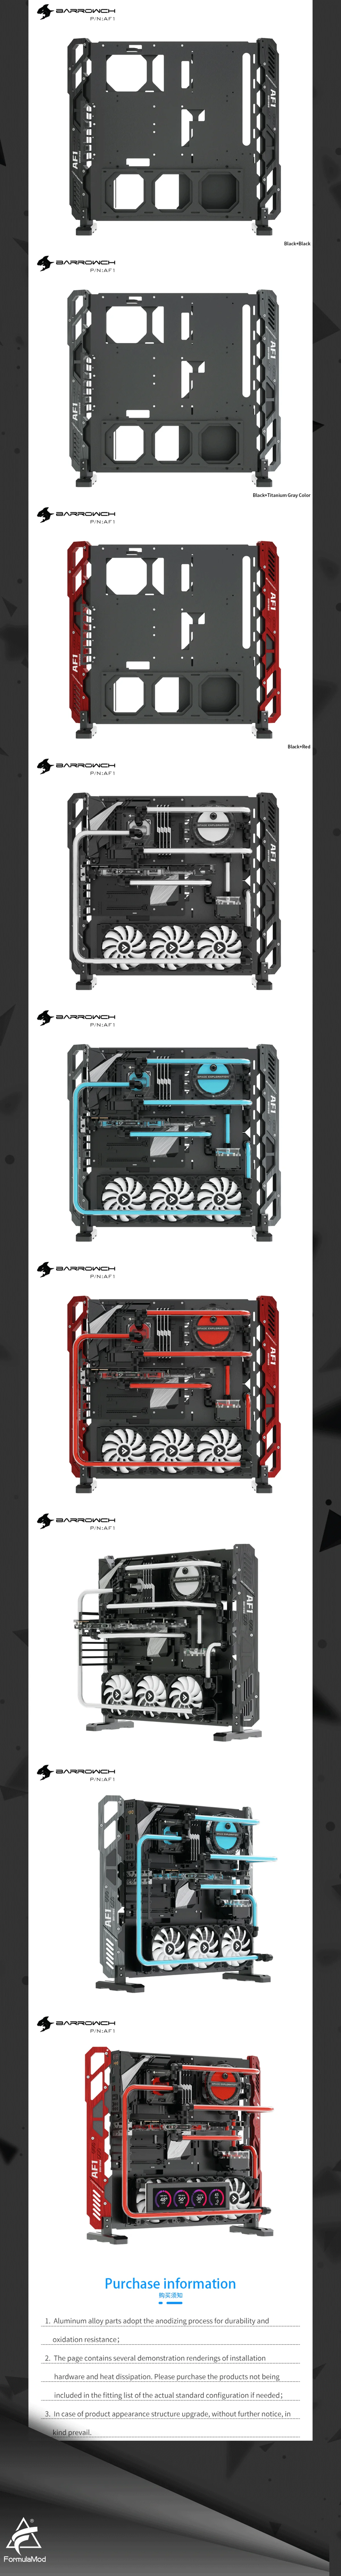 Barrowch AF1 Limited edition Open Case, Aluminum Alloy Multi-cold Radiator Water Cooling Frame, PC Computer Open Chassis  